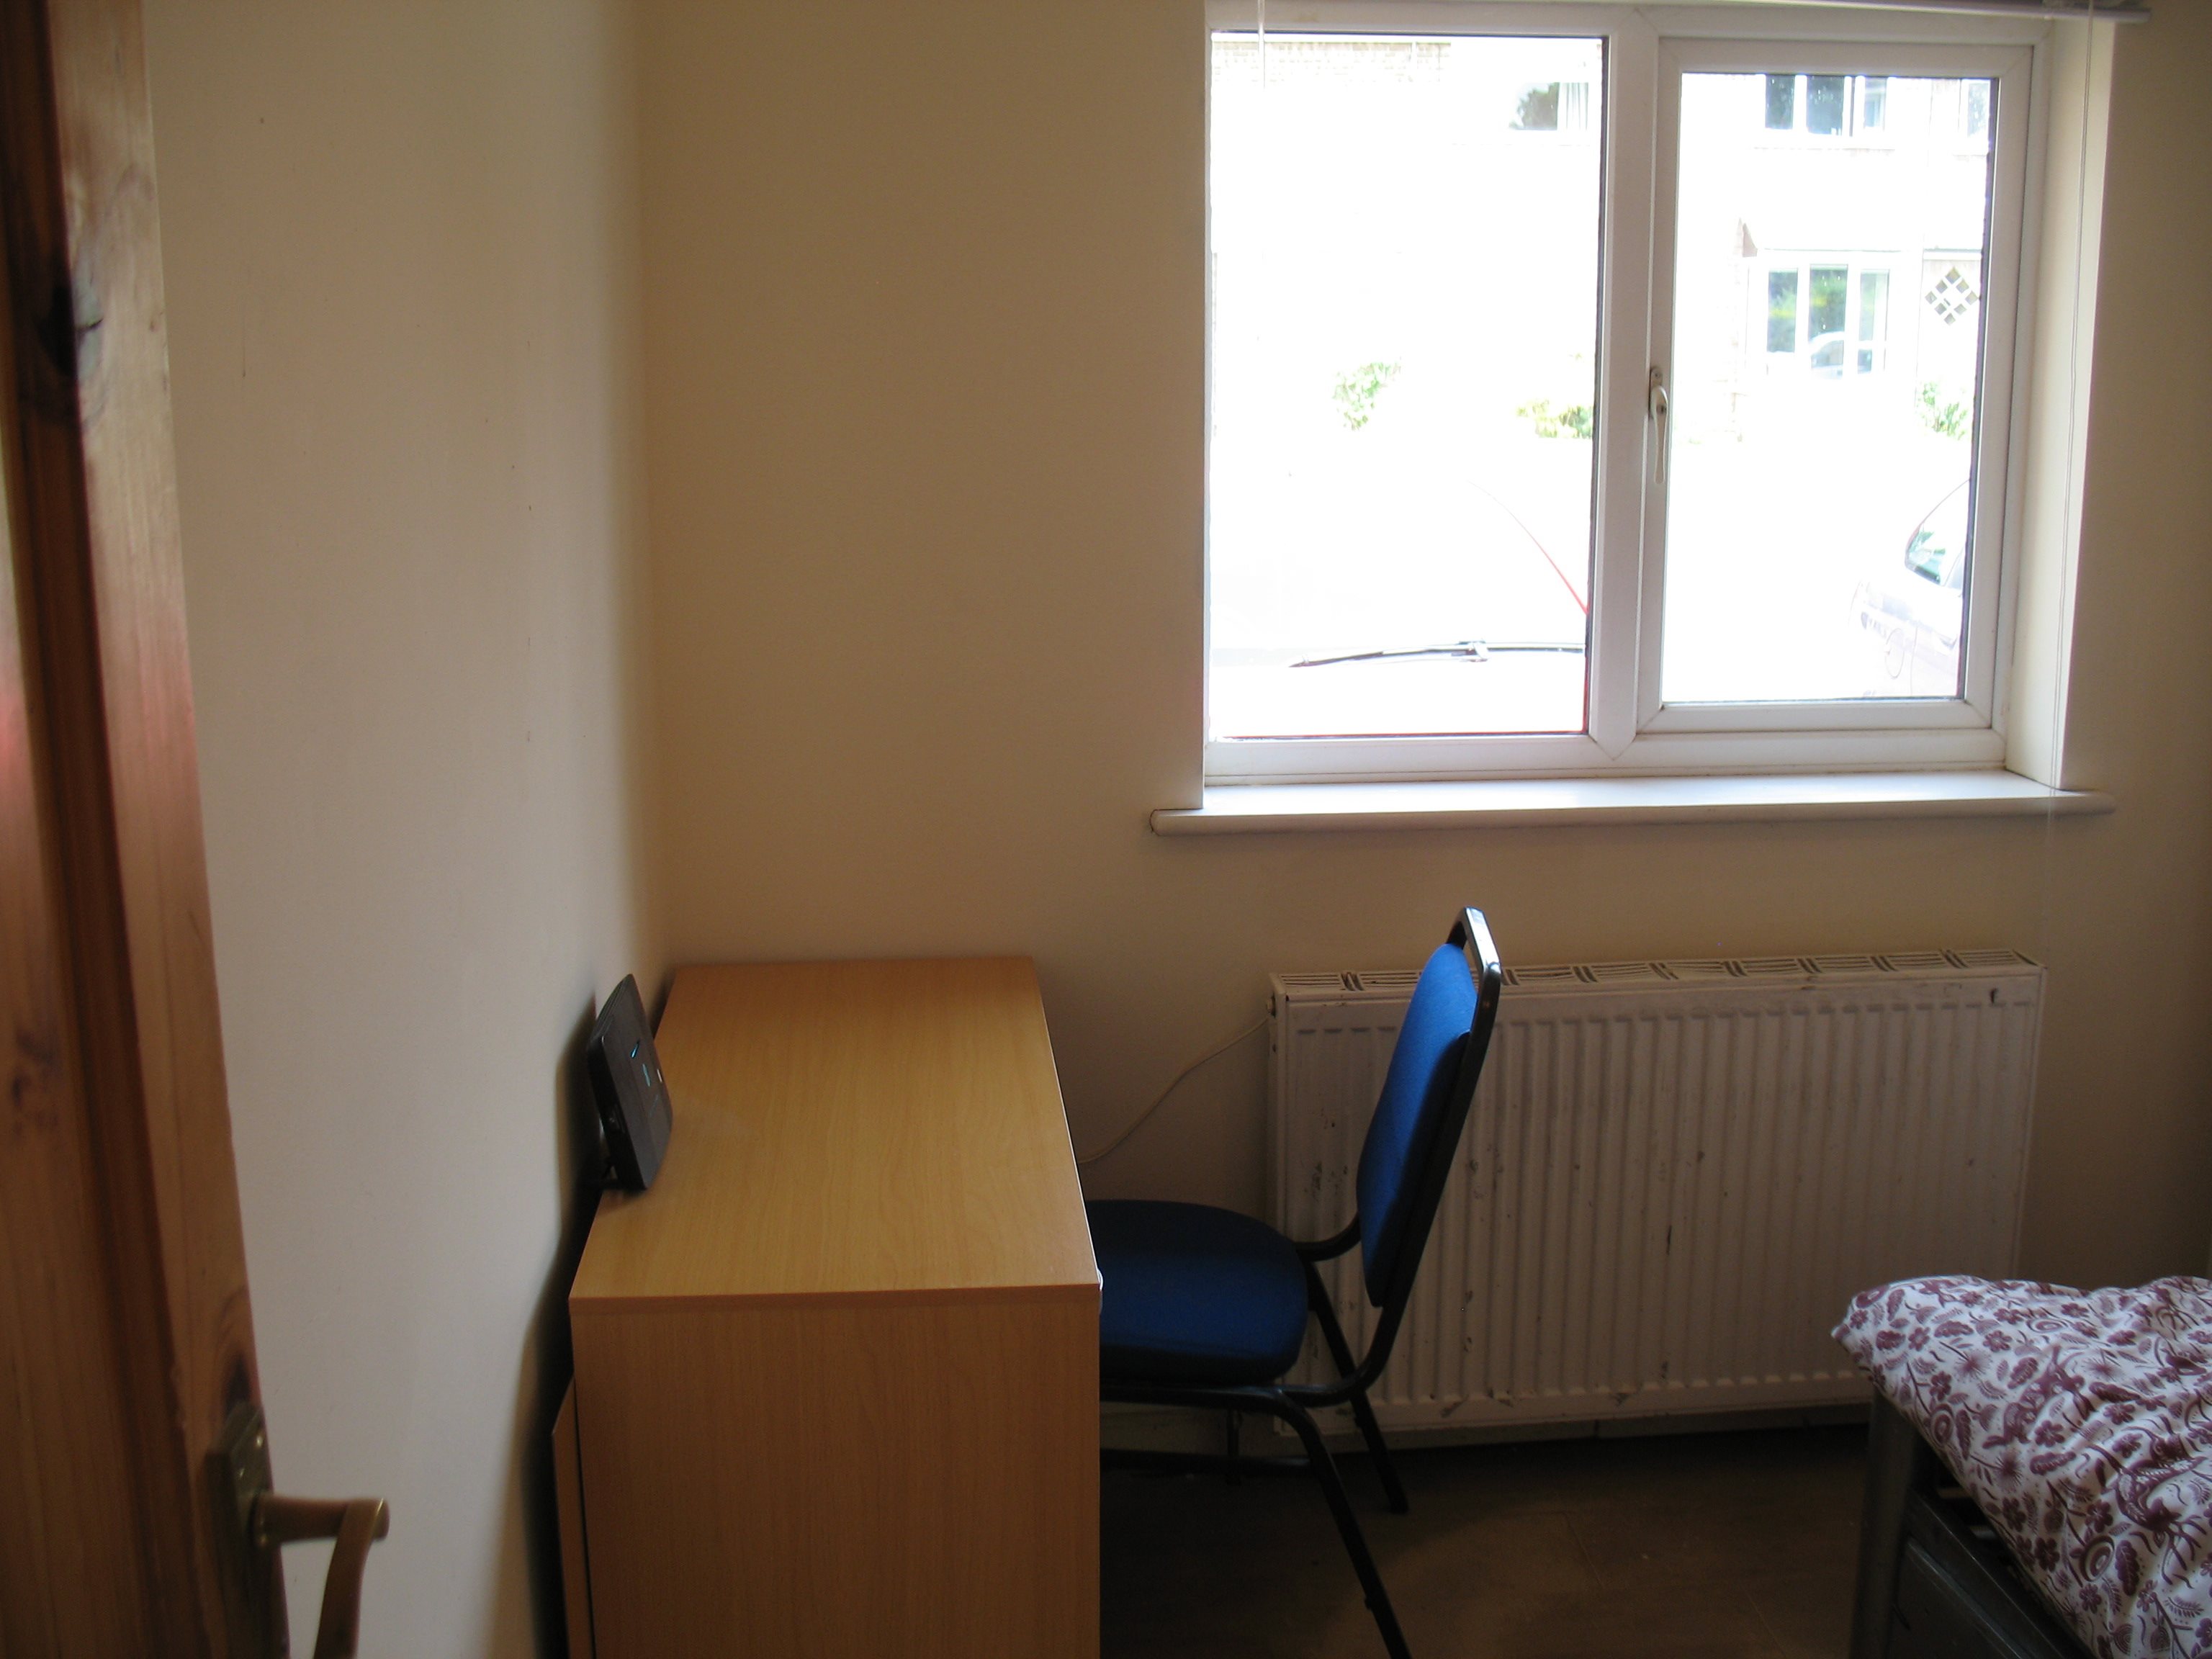 1 bed house / flat share to rent in Henrietta Close, Wivenhoe  - Property Image 2